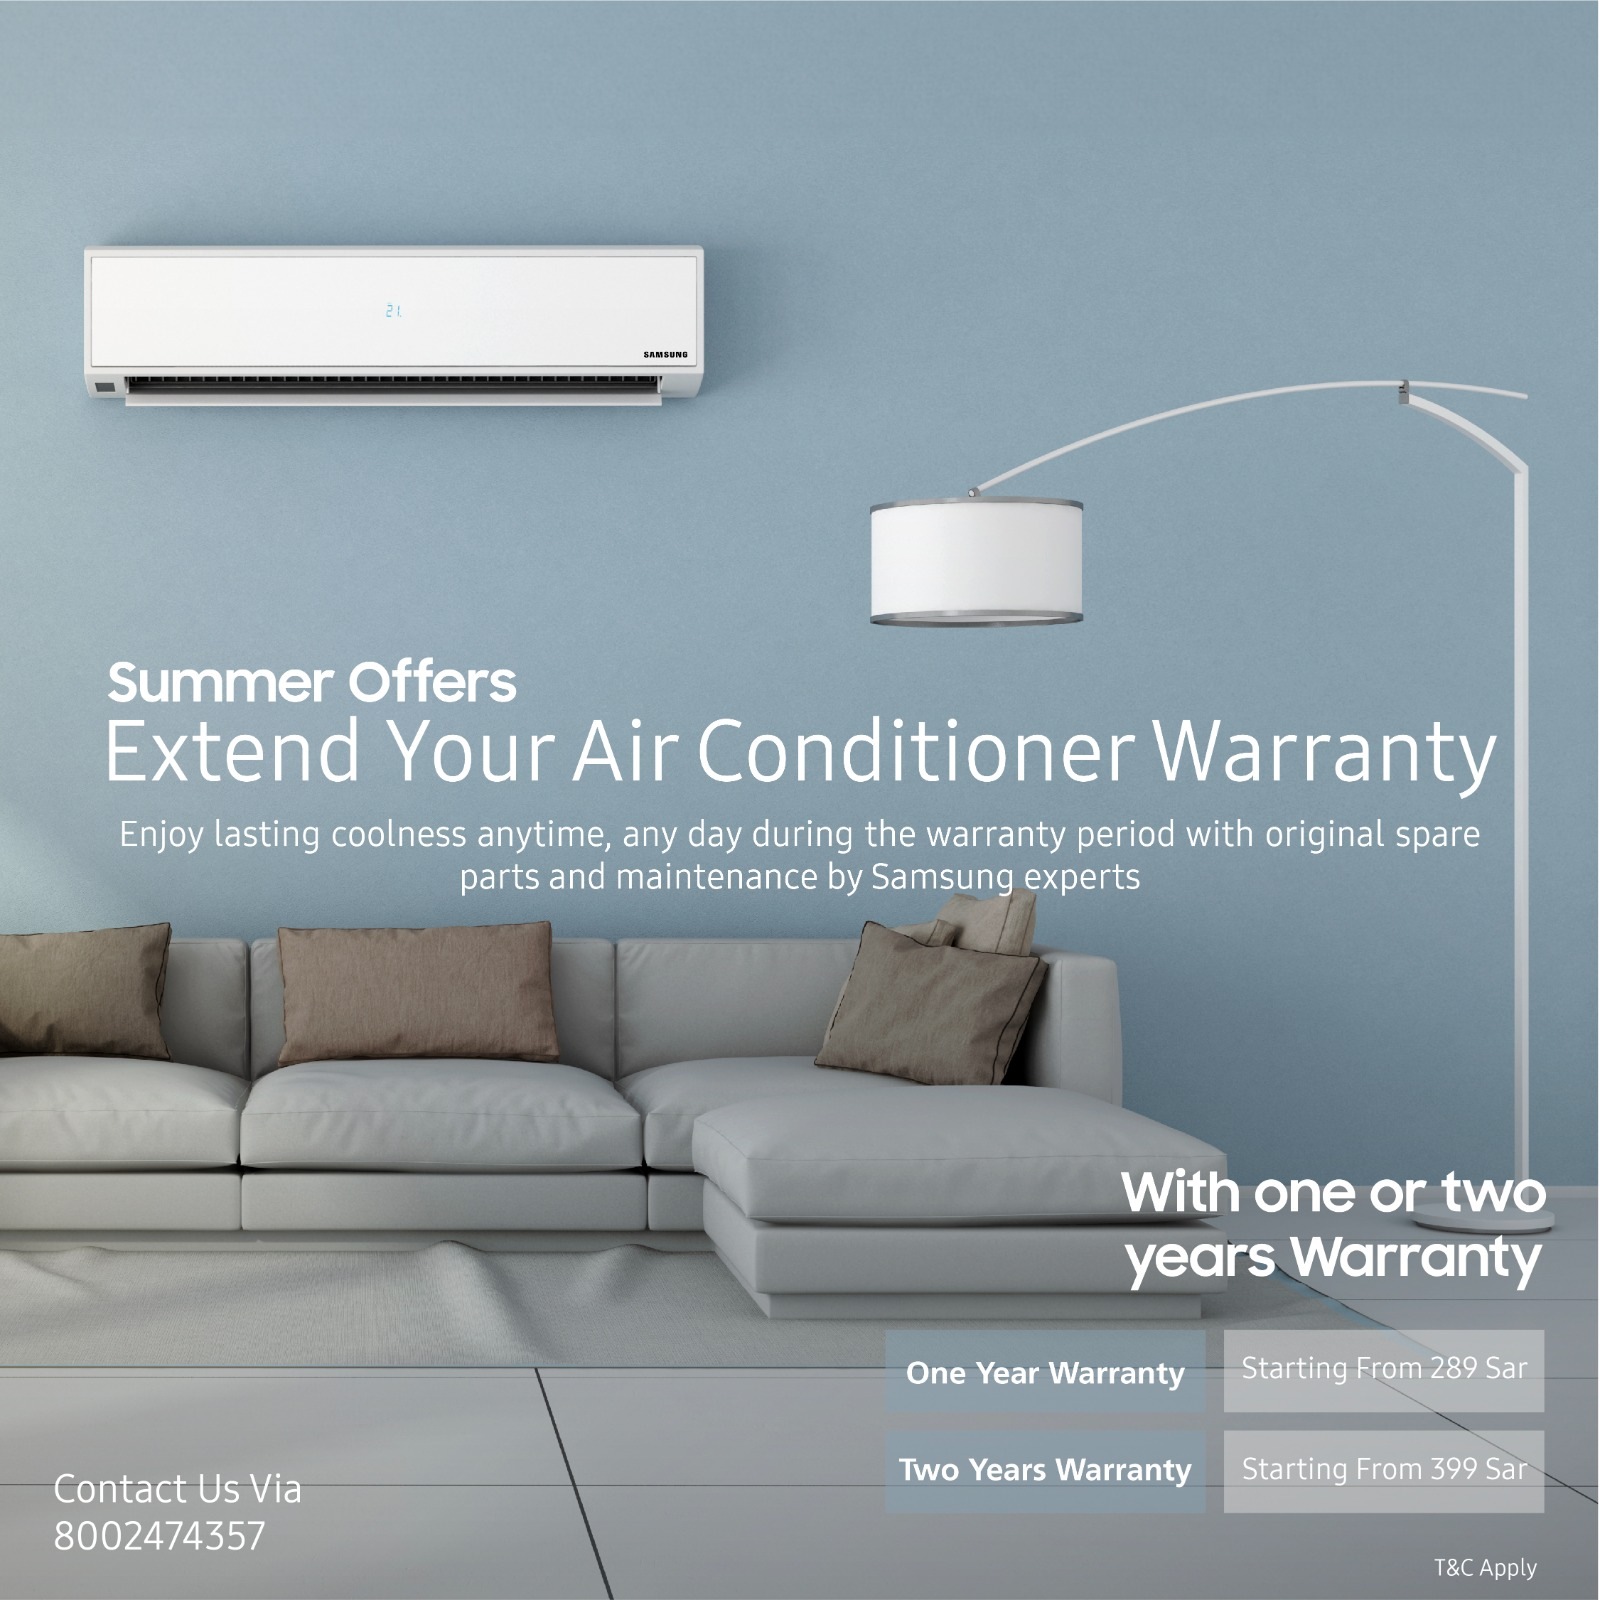 Take the right action & extend your warranty for your Air Conditioning